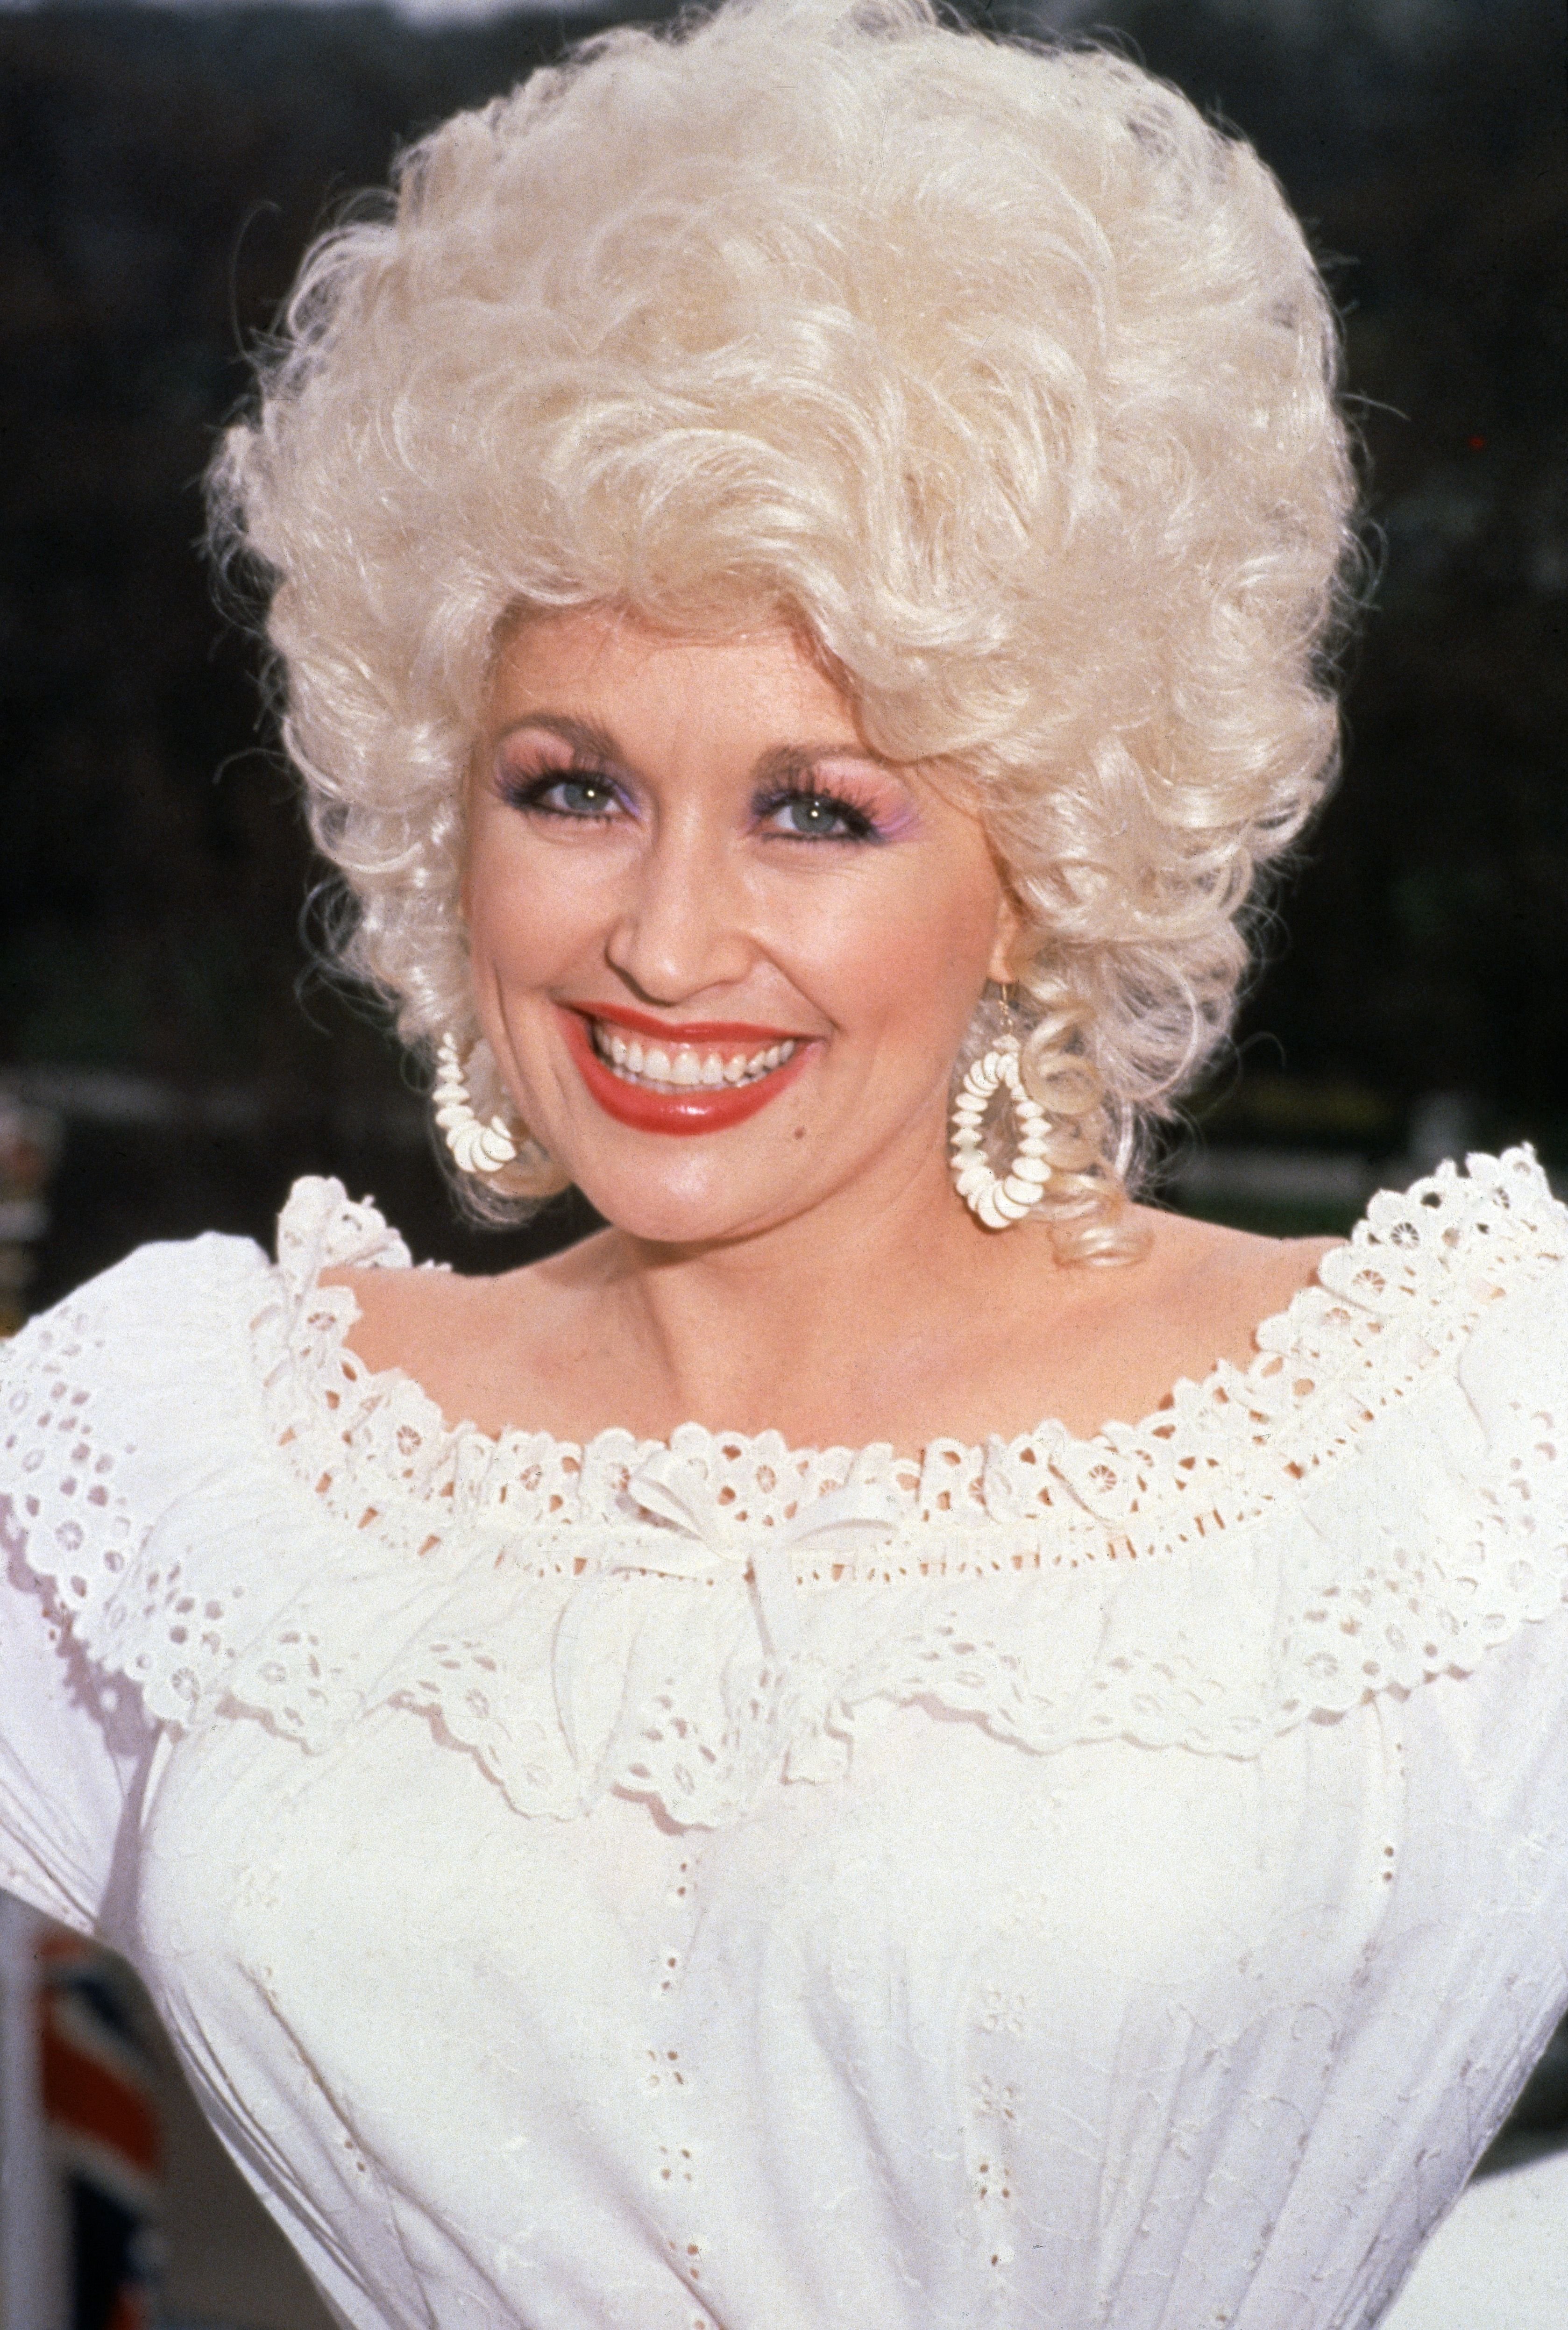 Dolly Parton in London, 1983. | Source: Getty Images